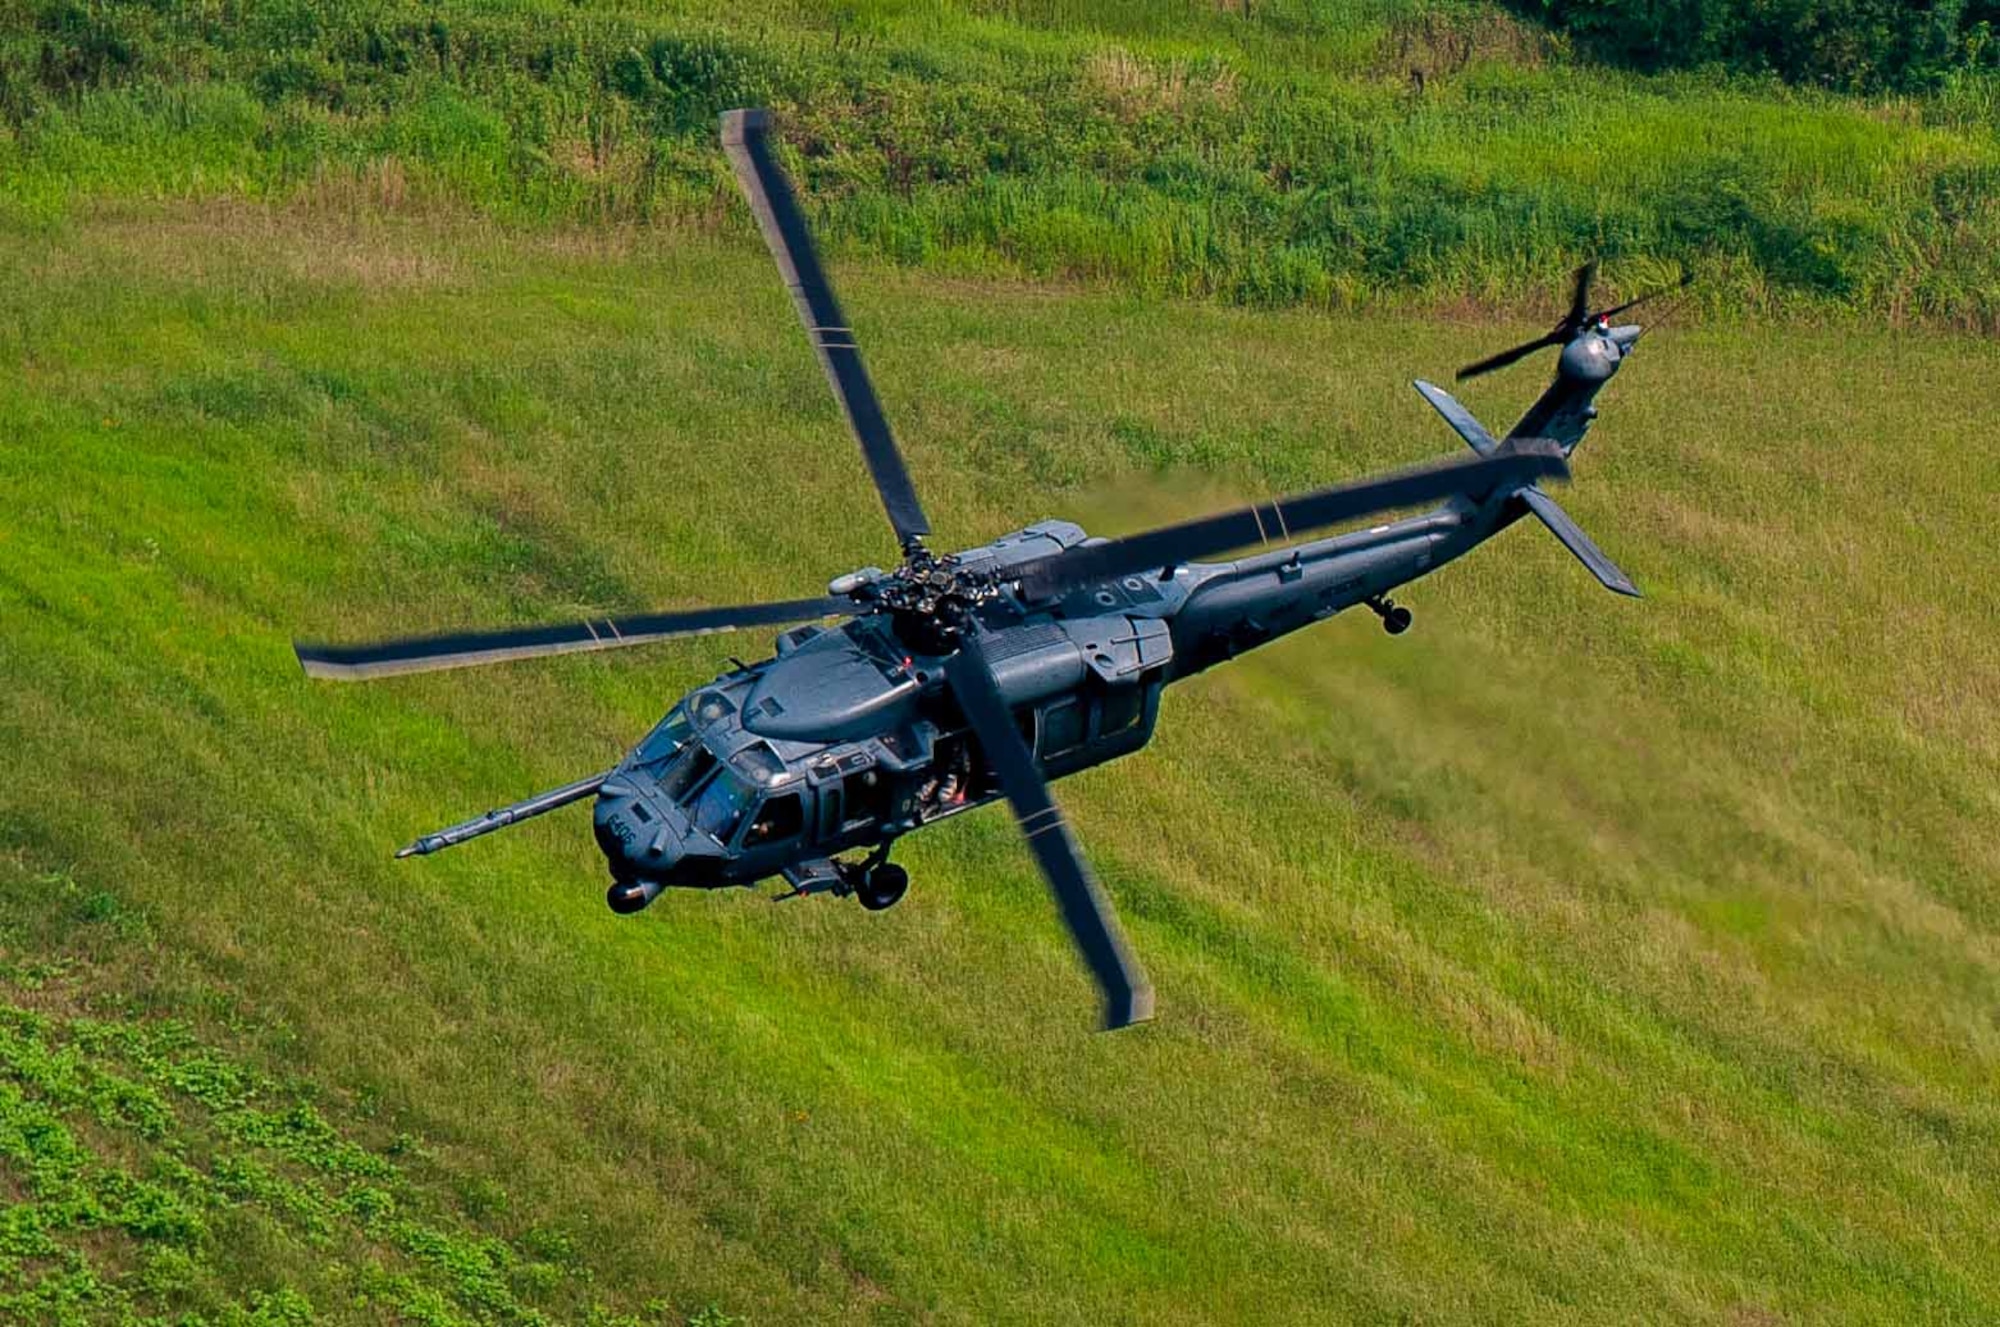 An HH-60G Pave Hawk assigned to 33rd Rescue Squadron flies over Republic of Korea air space for Exercise Pacific Thunder 16-2, July 13, 2016. The 33rd RQS comes to Osan AB, ROK, for Pacific Thunder to train their combat search and rescue capabilities. (U.S. Air Force photo by Staff Sgt. Jonathan Steffen/Released) 